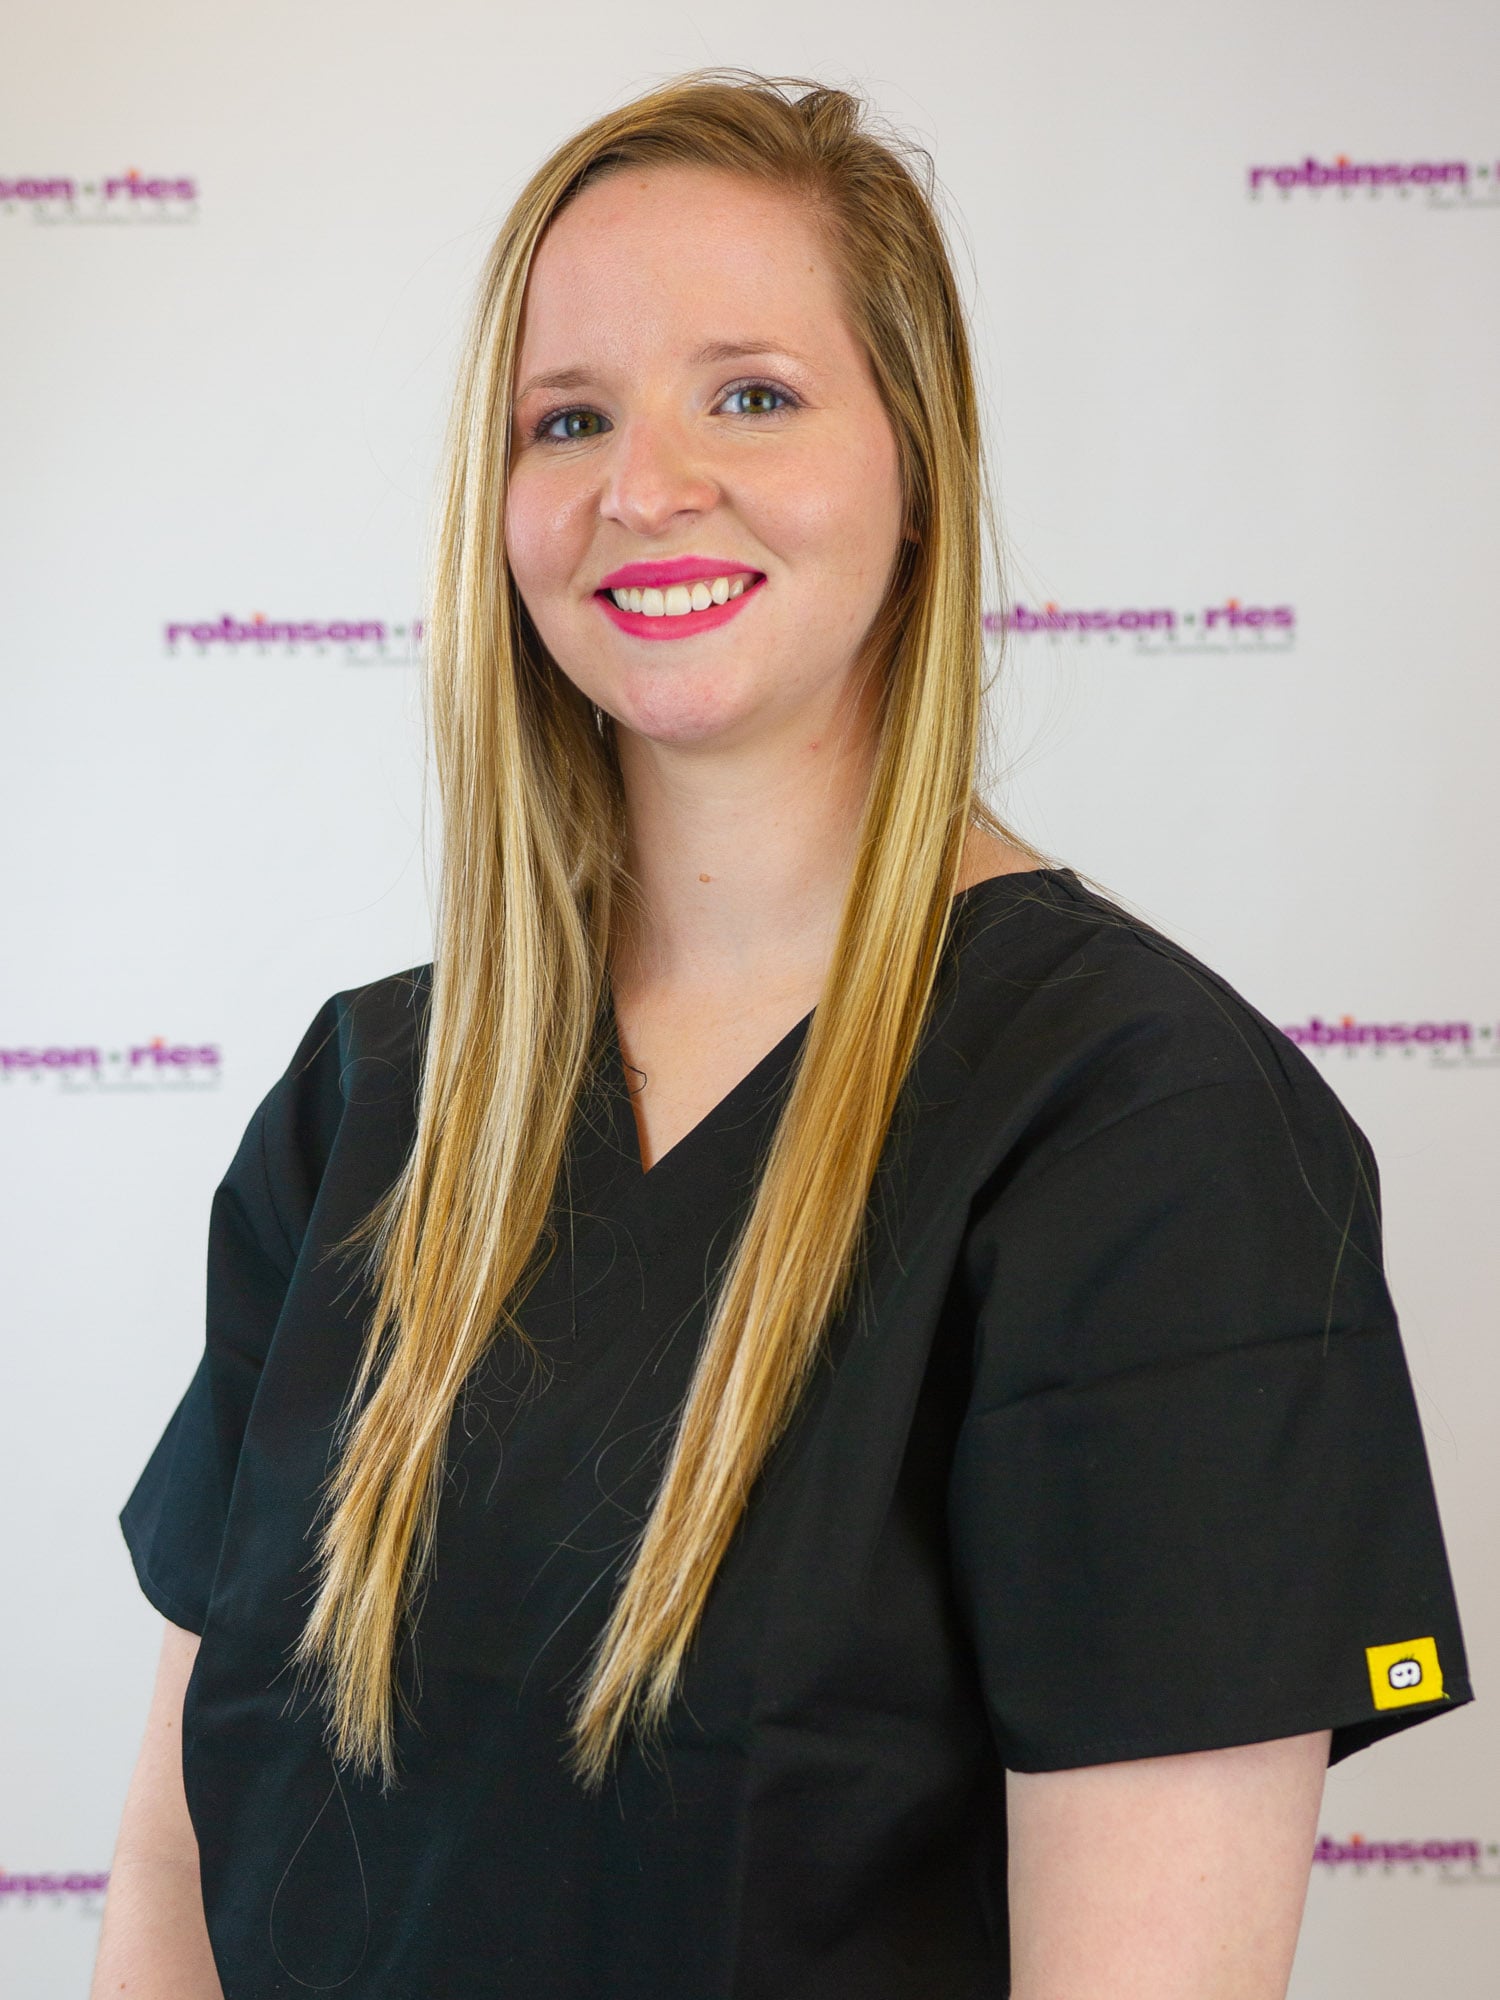 Myranda is an Orthodontic Assistant at Robinson and Ries Orthodontics.